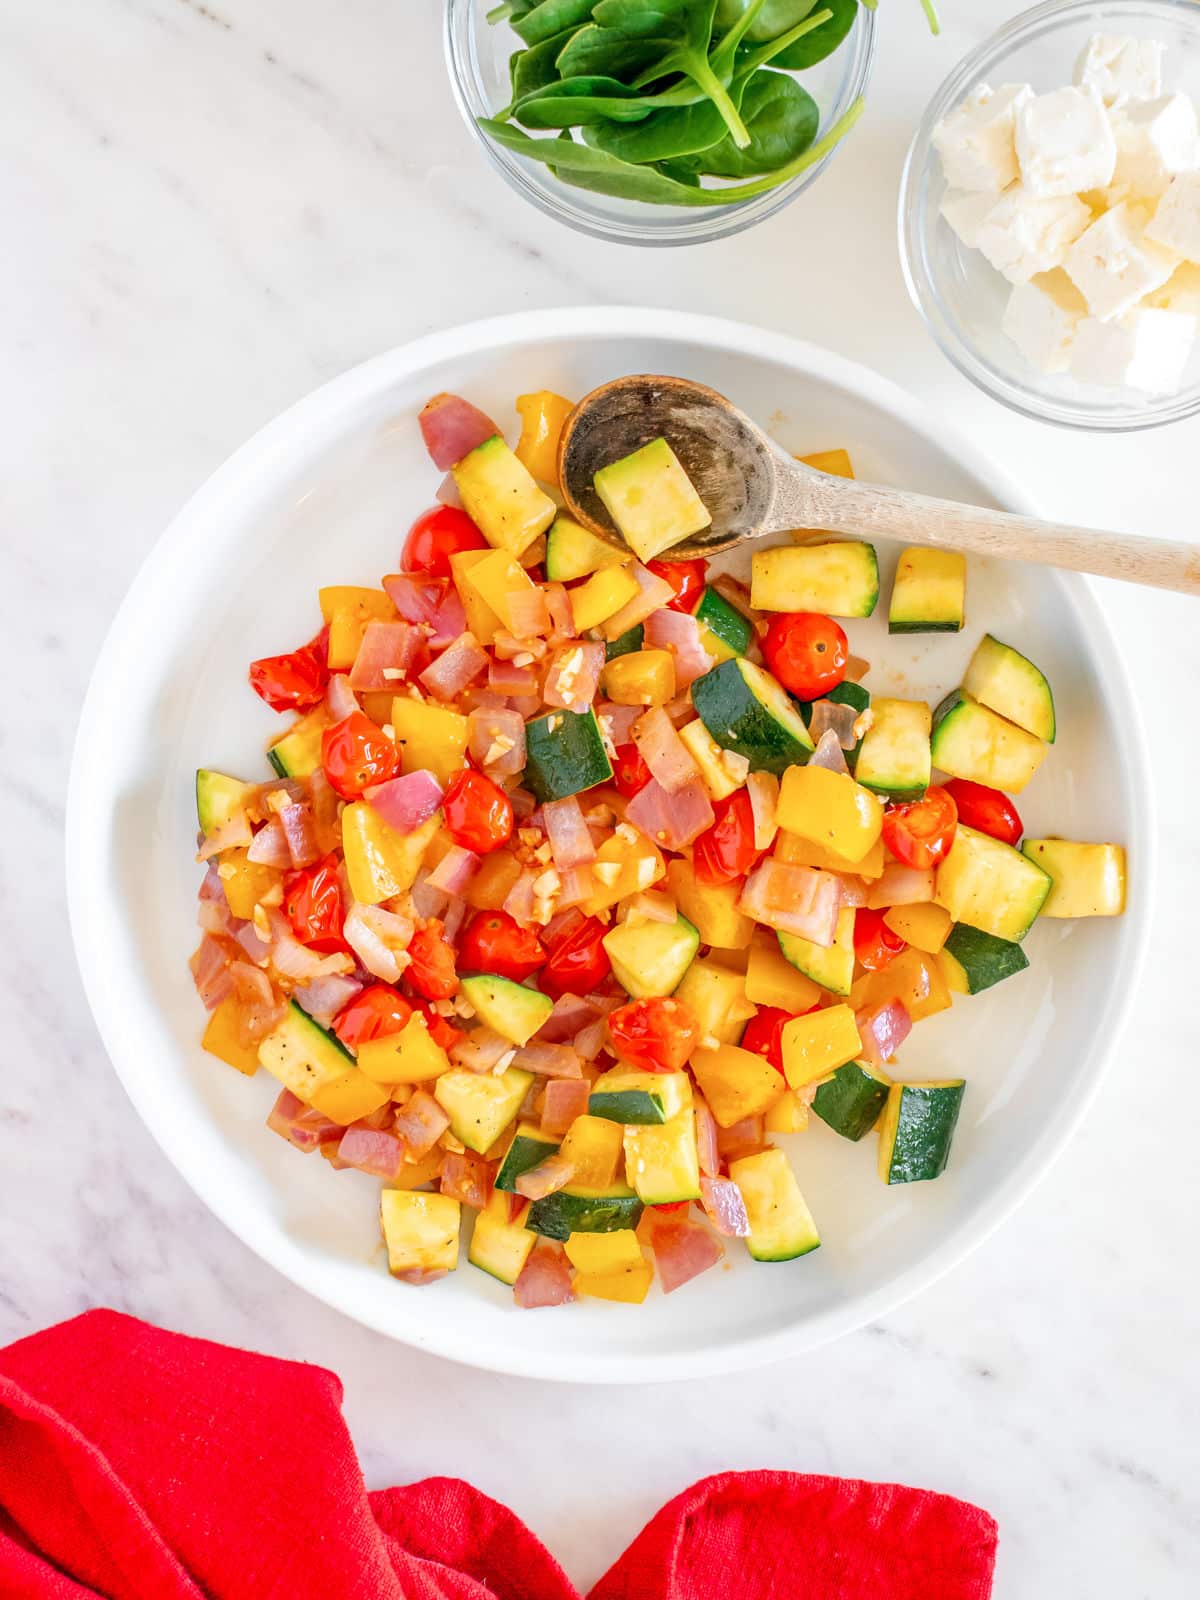 A bowl of fresh diced vegetable salad with zucchini, tomatoes, and yellow bell peppers, accompanied by a side of greens and cheese.